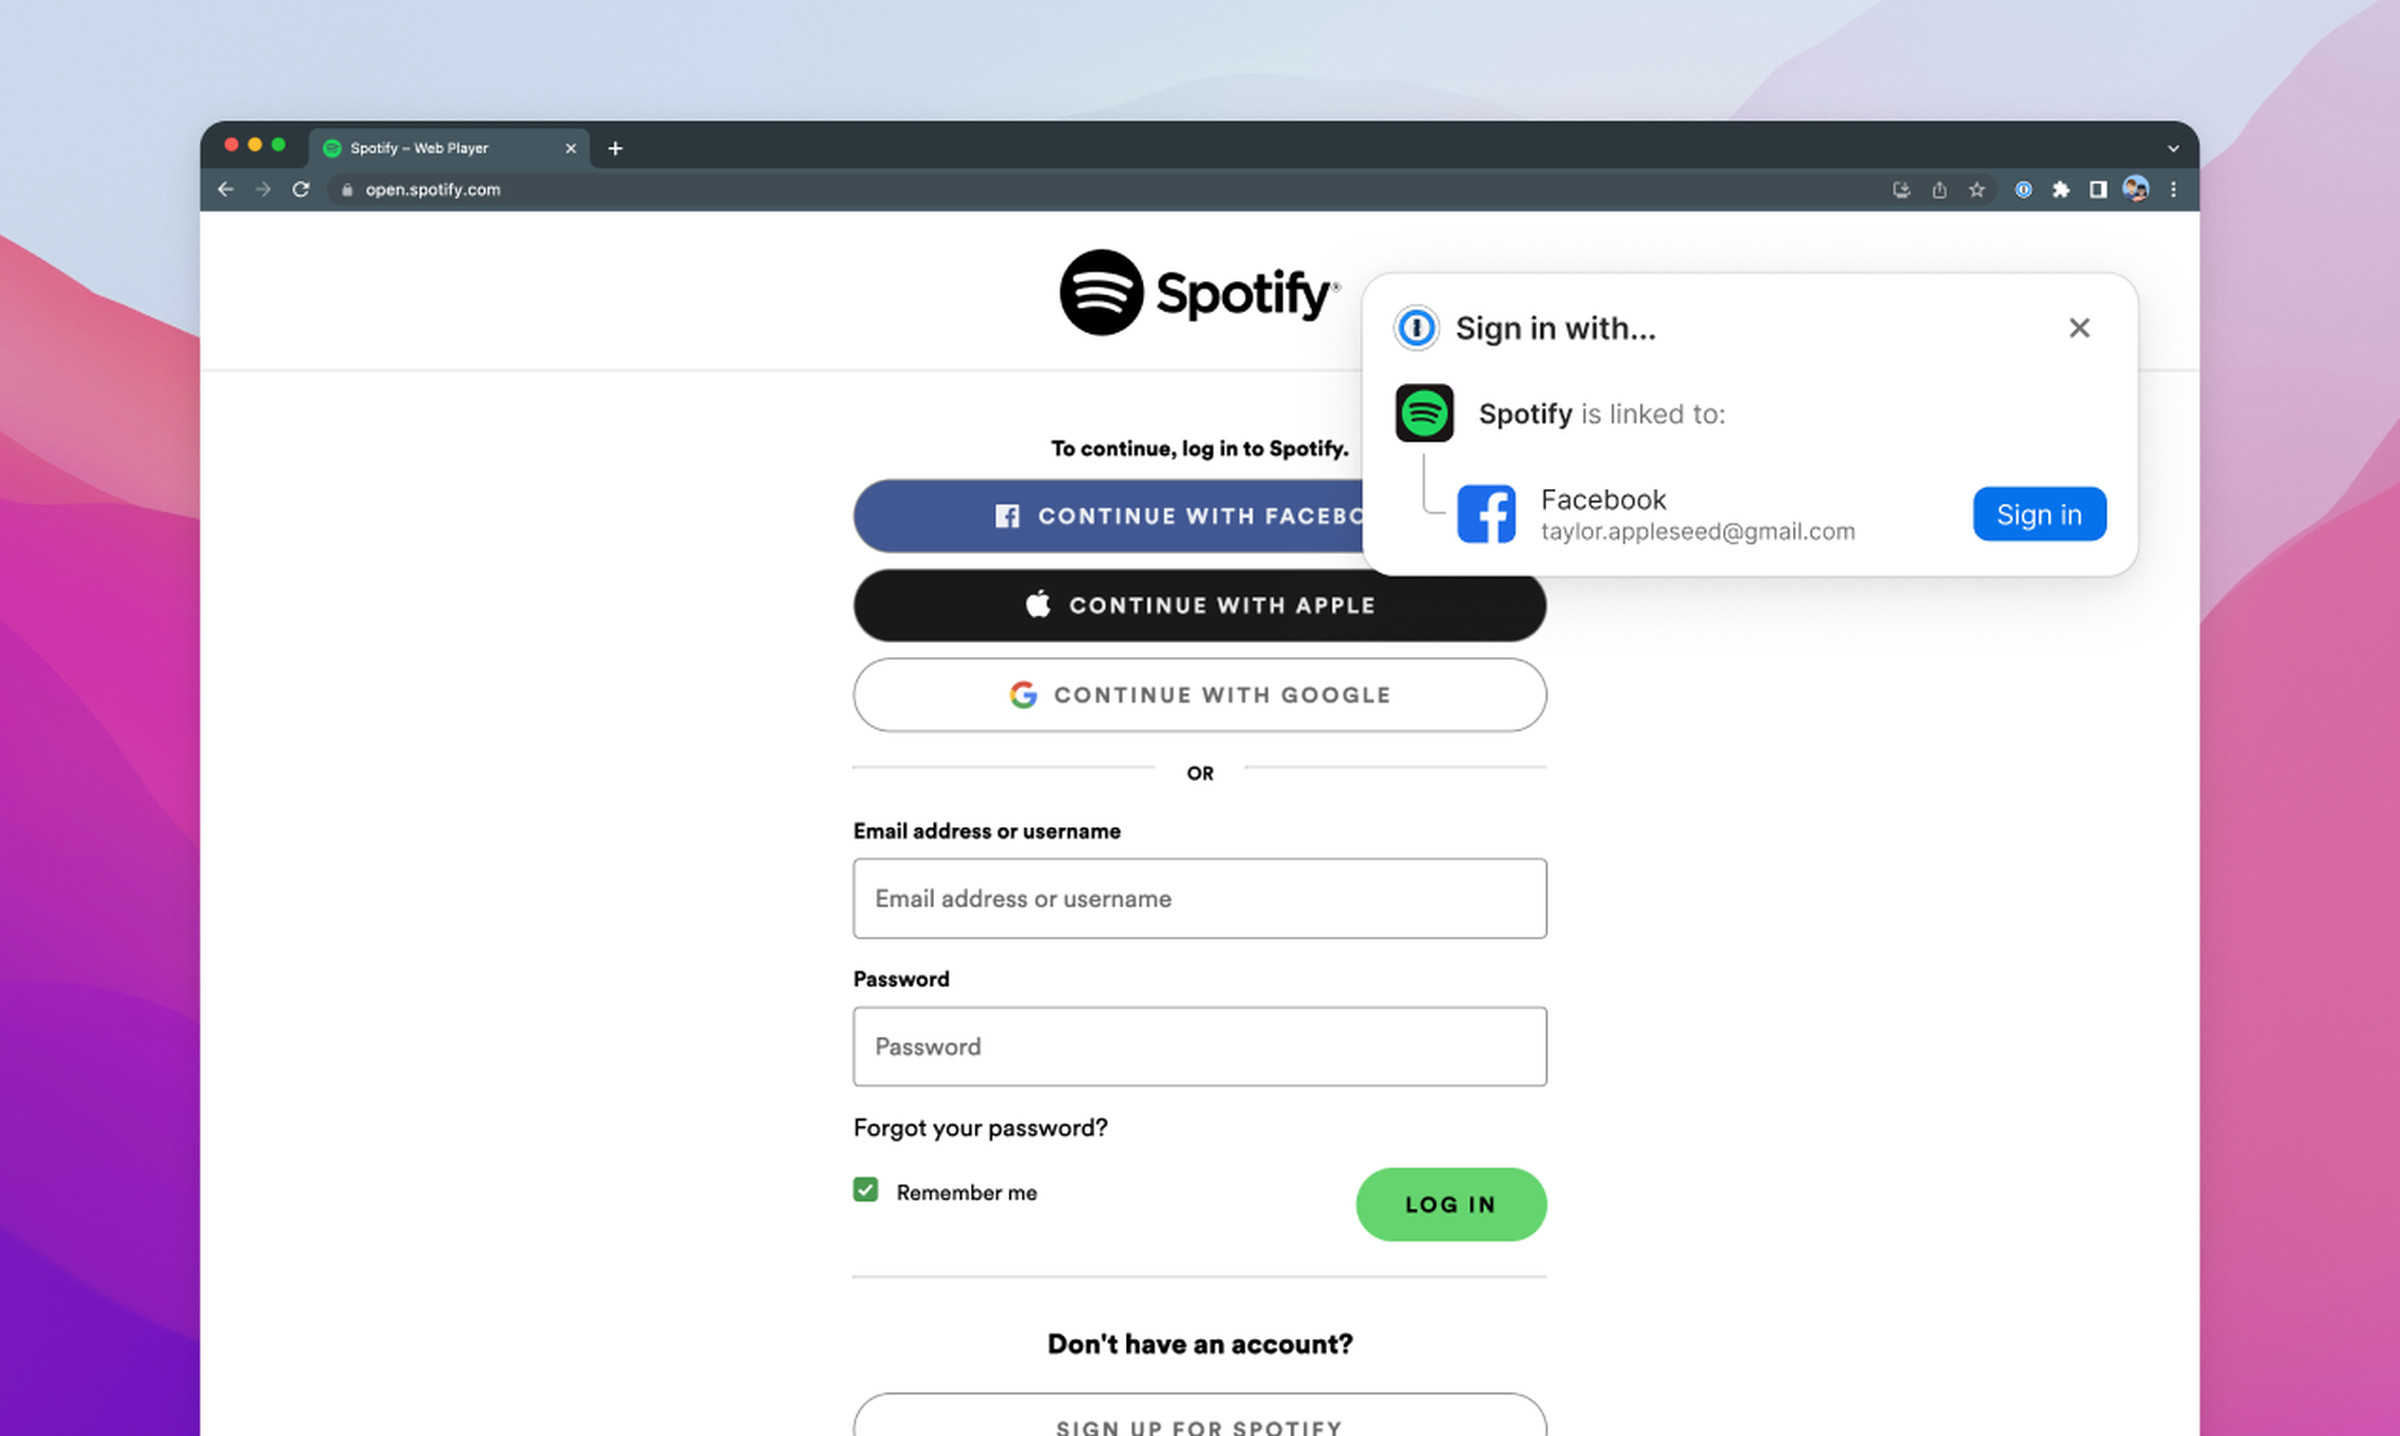 1Password now remembers which third-party provider your Spotify account is associated with.